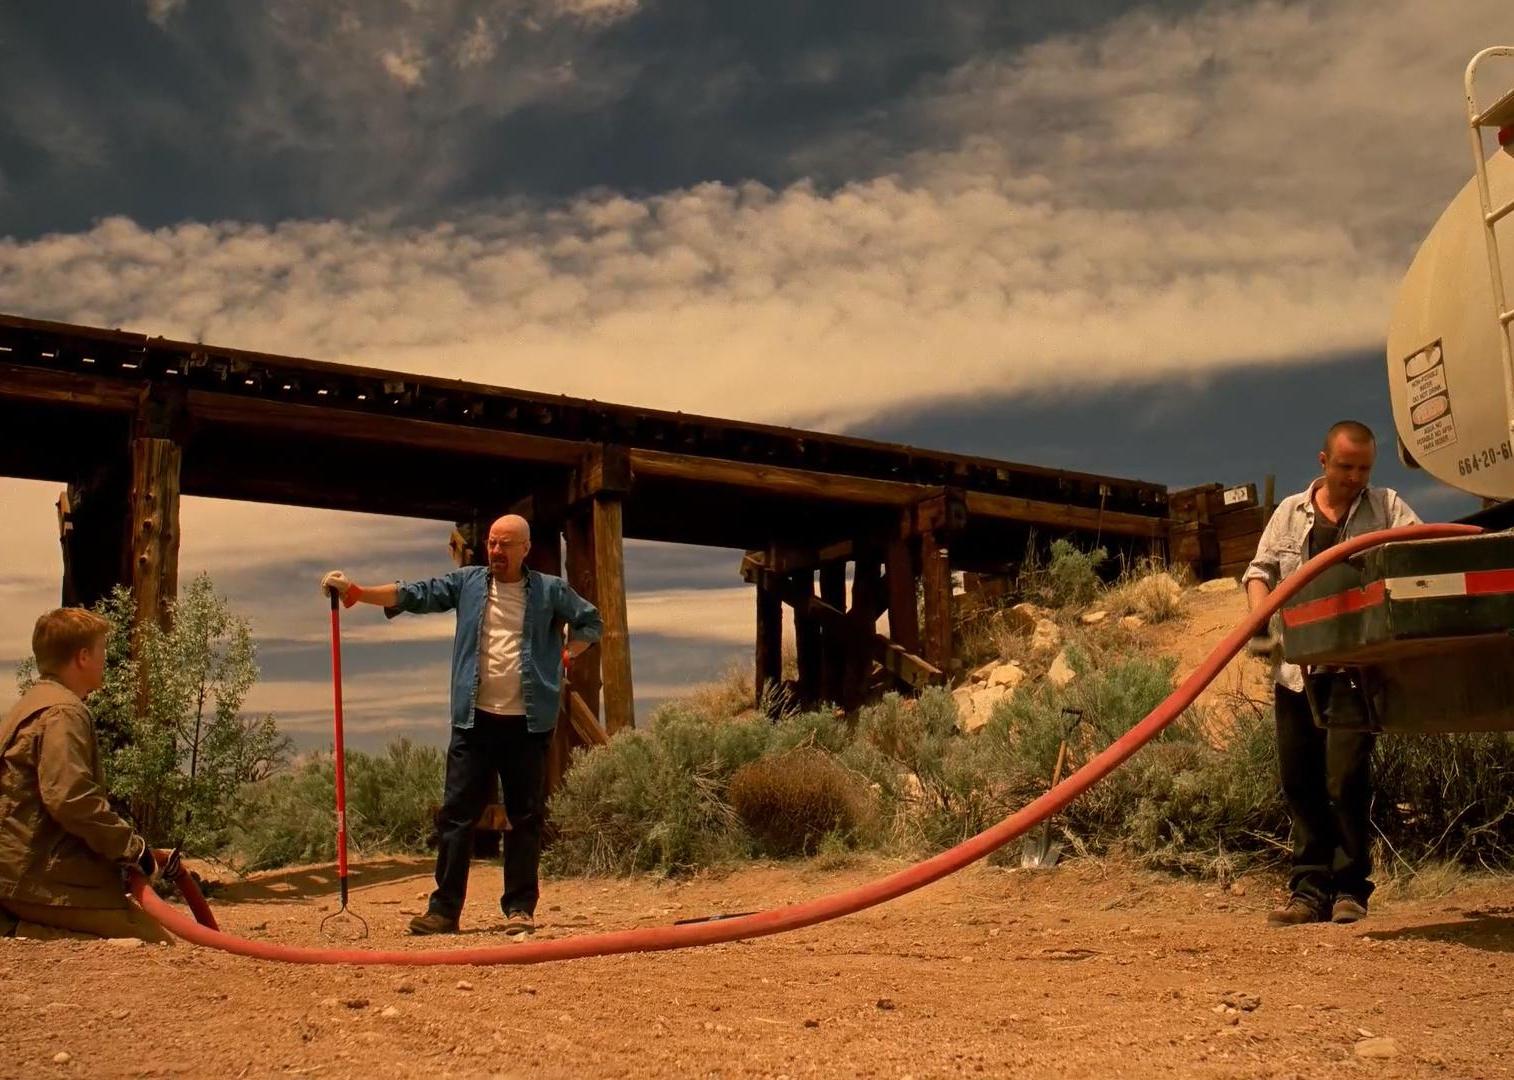 Bryan Cranston, Aaron Paul, and Jesse Plemons pump something from a truck in the desert.